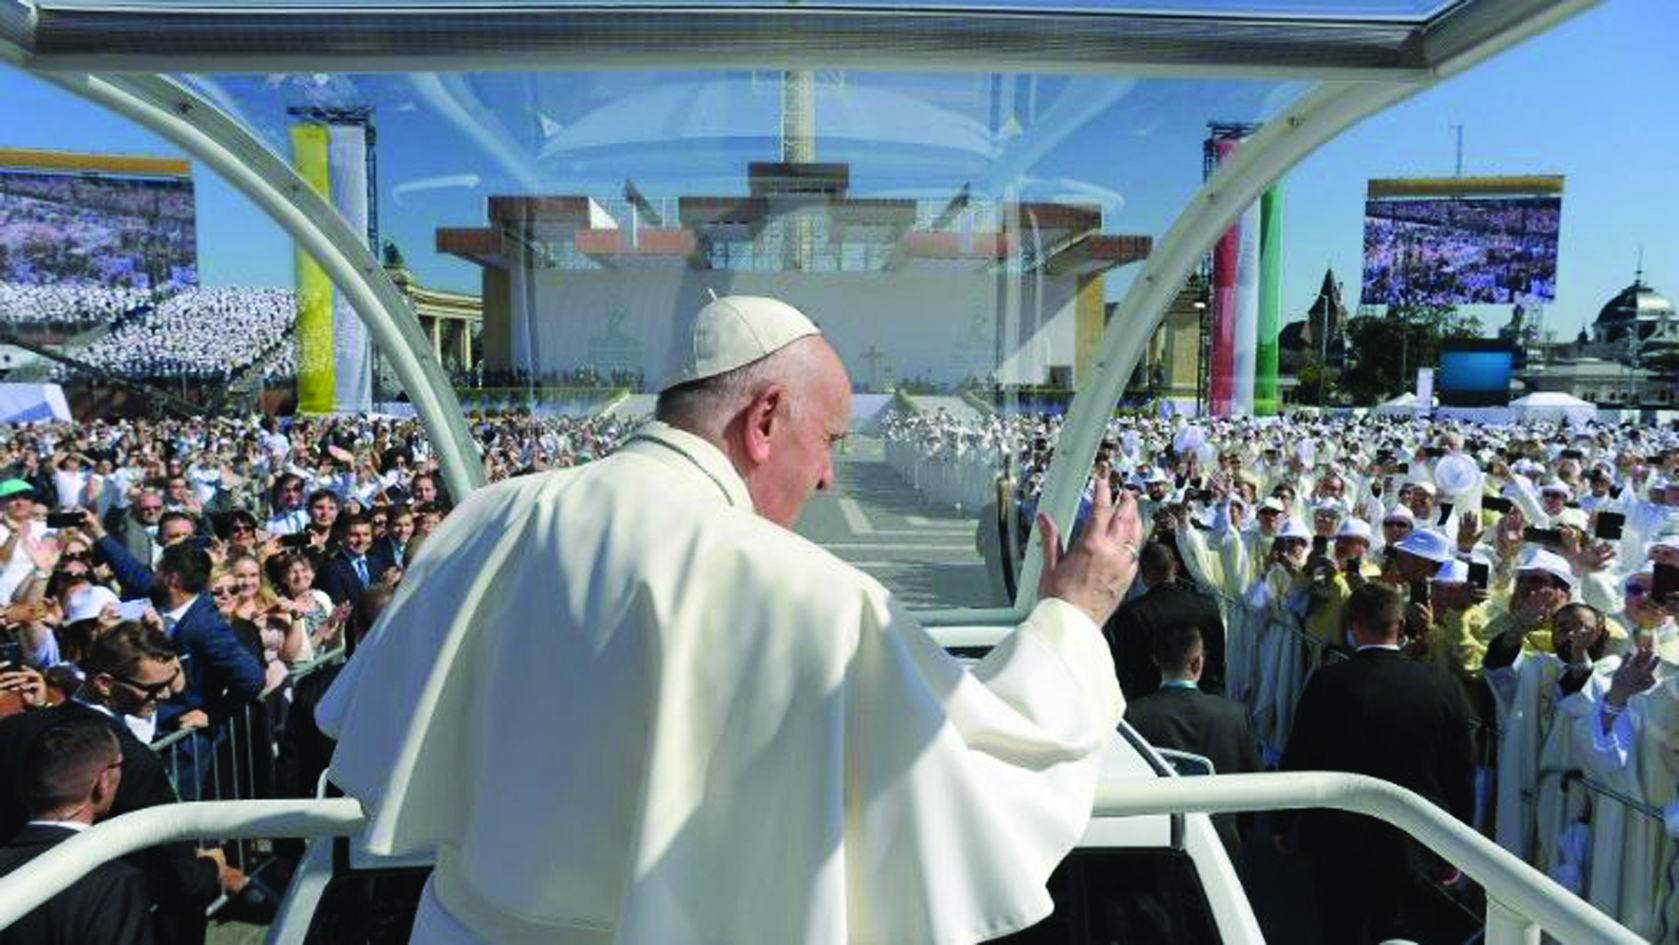 Francis Implores Slovakia’s Christians to Pursue “Freedom” in Christ Over Comfort